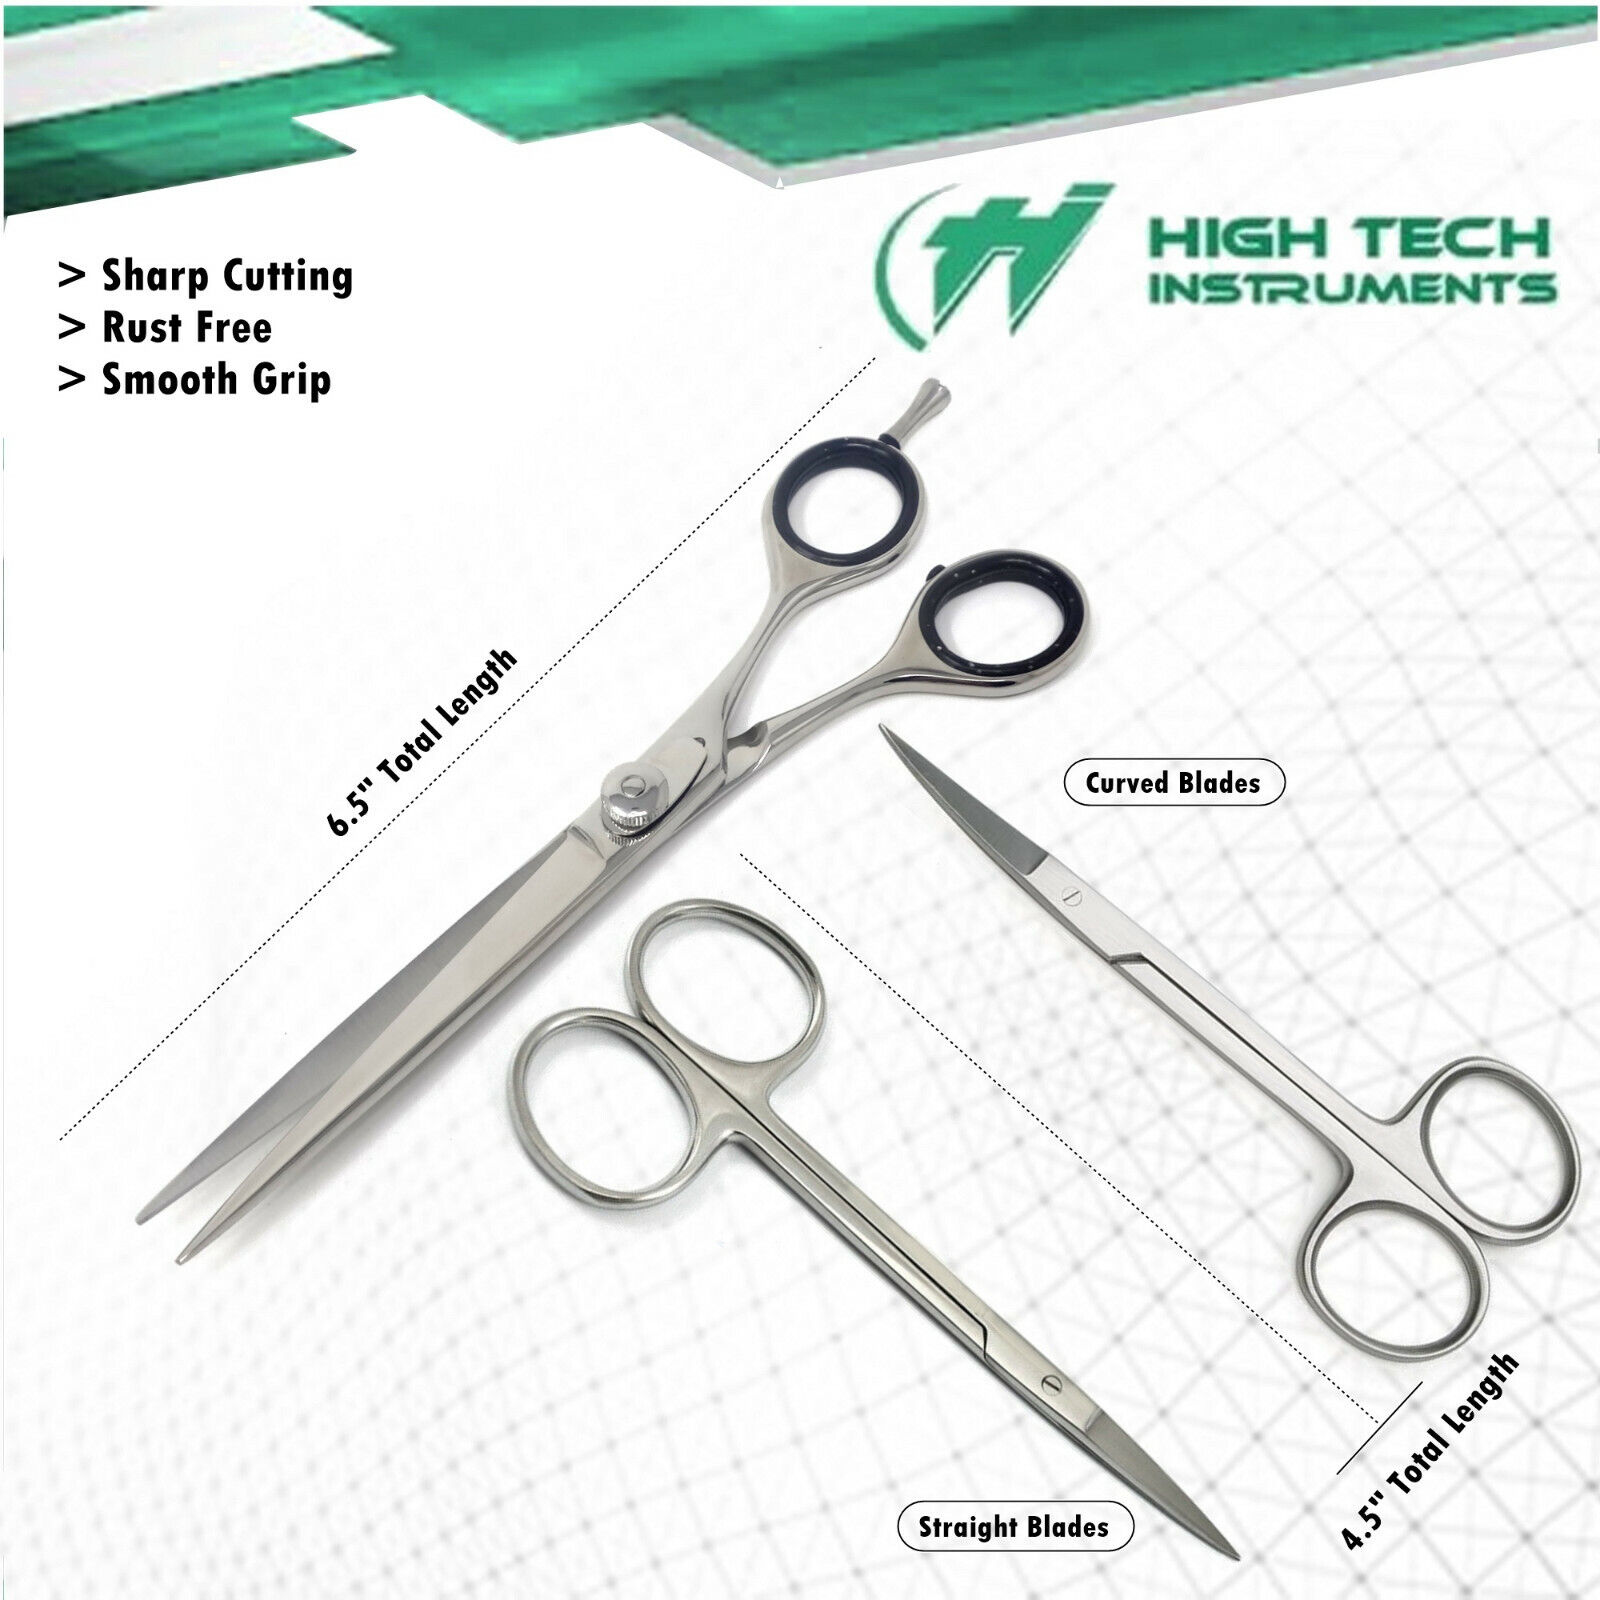 Professional Barber Hair Cutting Shears & Micro Scissors Stainless Steel NEW HTI Does Not Apply